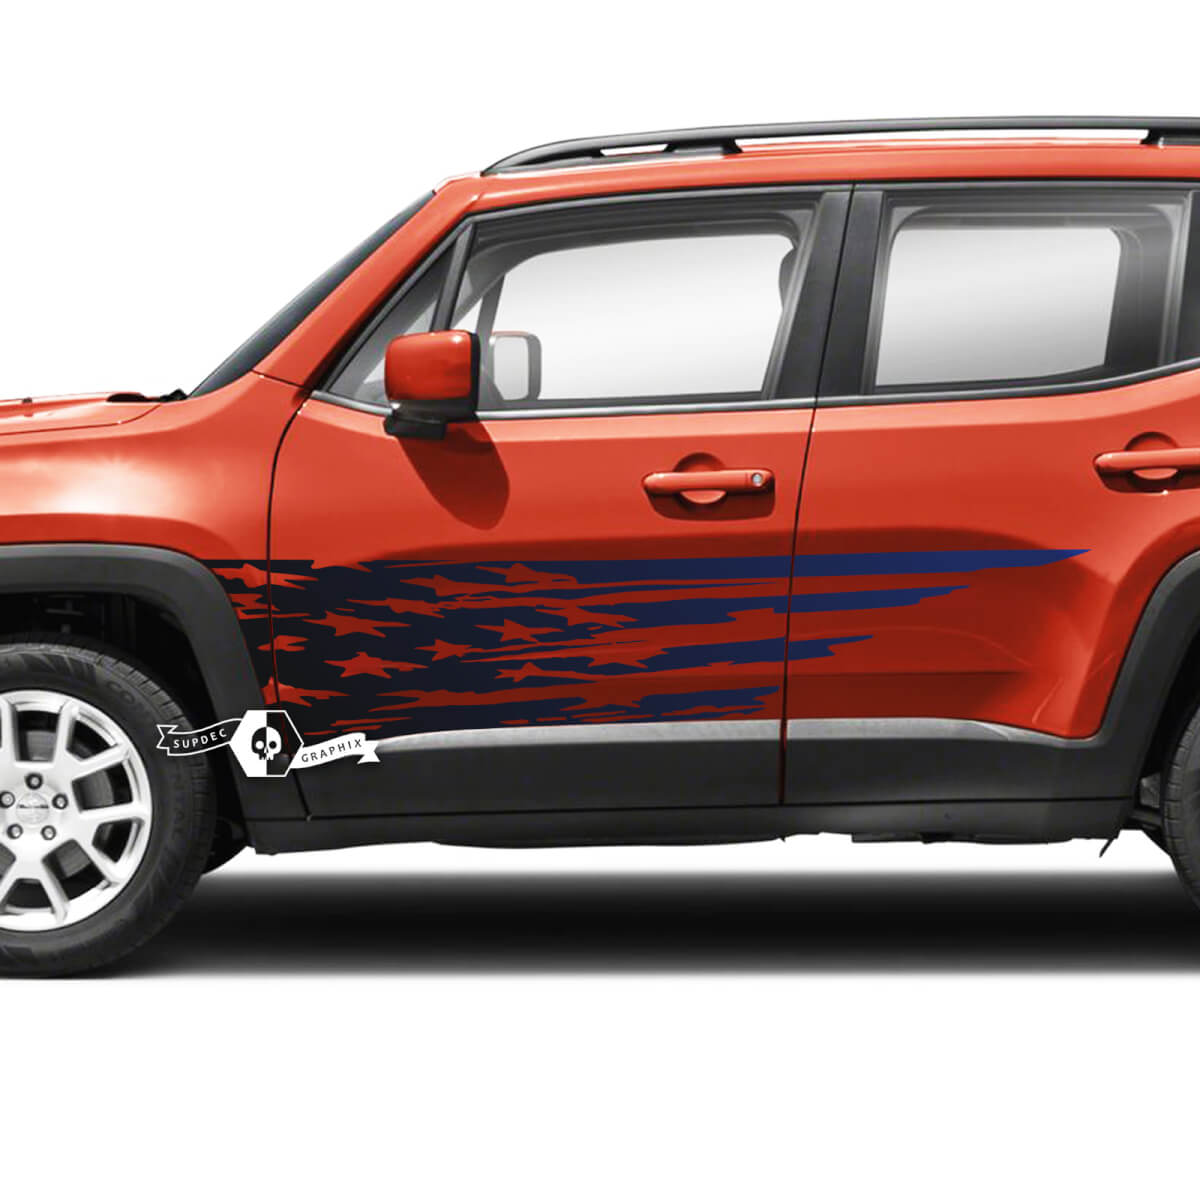 Pair Jeep Renegade Doors USA Flag Destroyed Graphic Vinyl Decal Sticker 2 Colors Gradient
